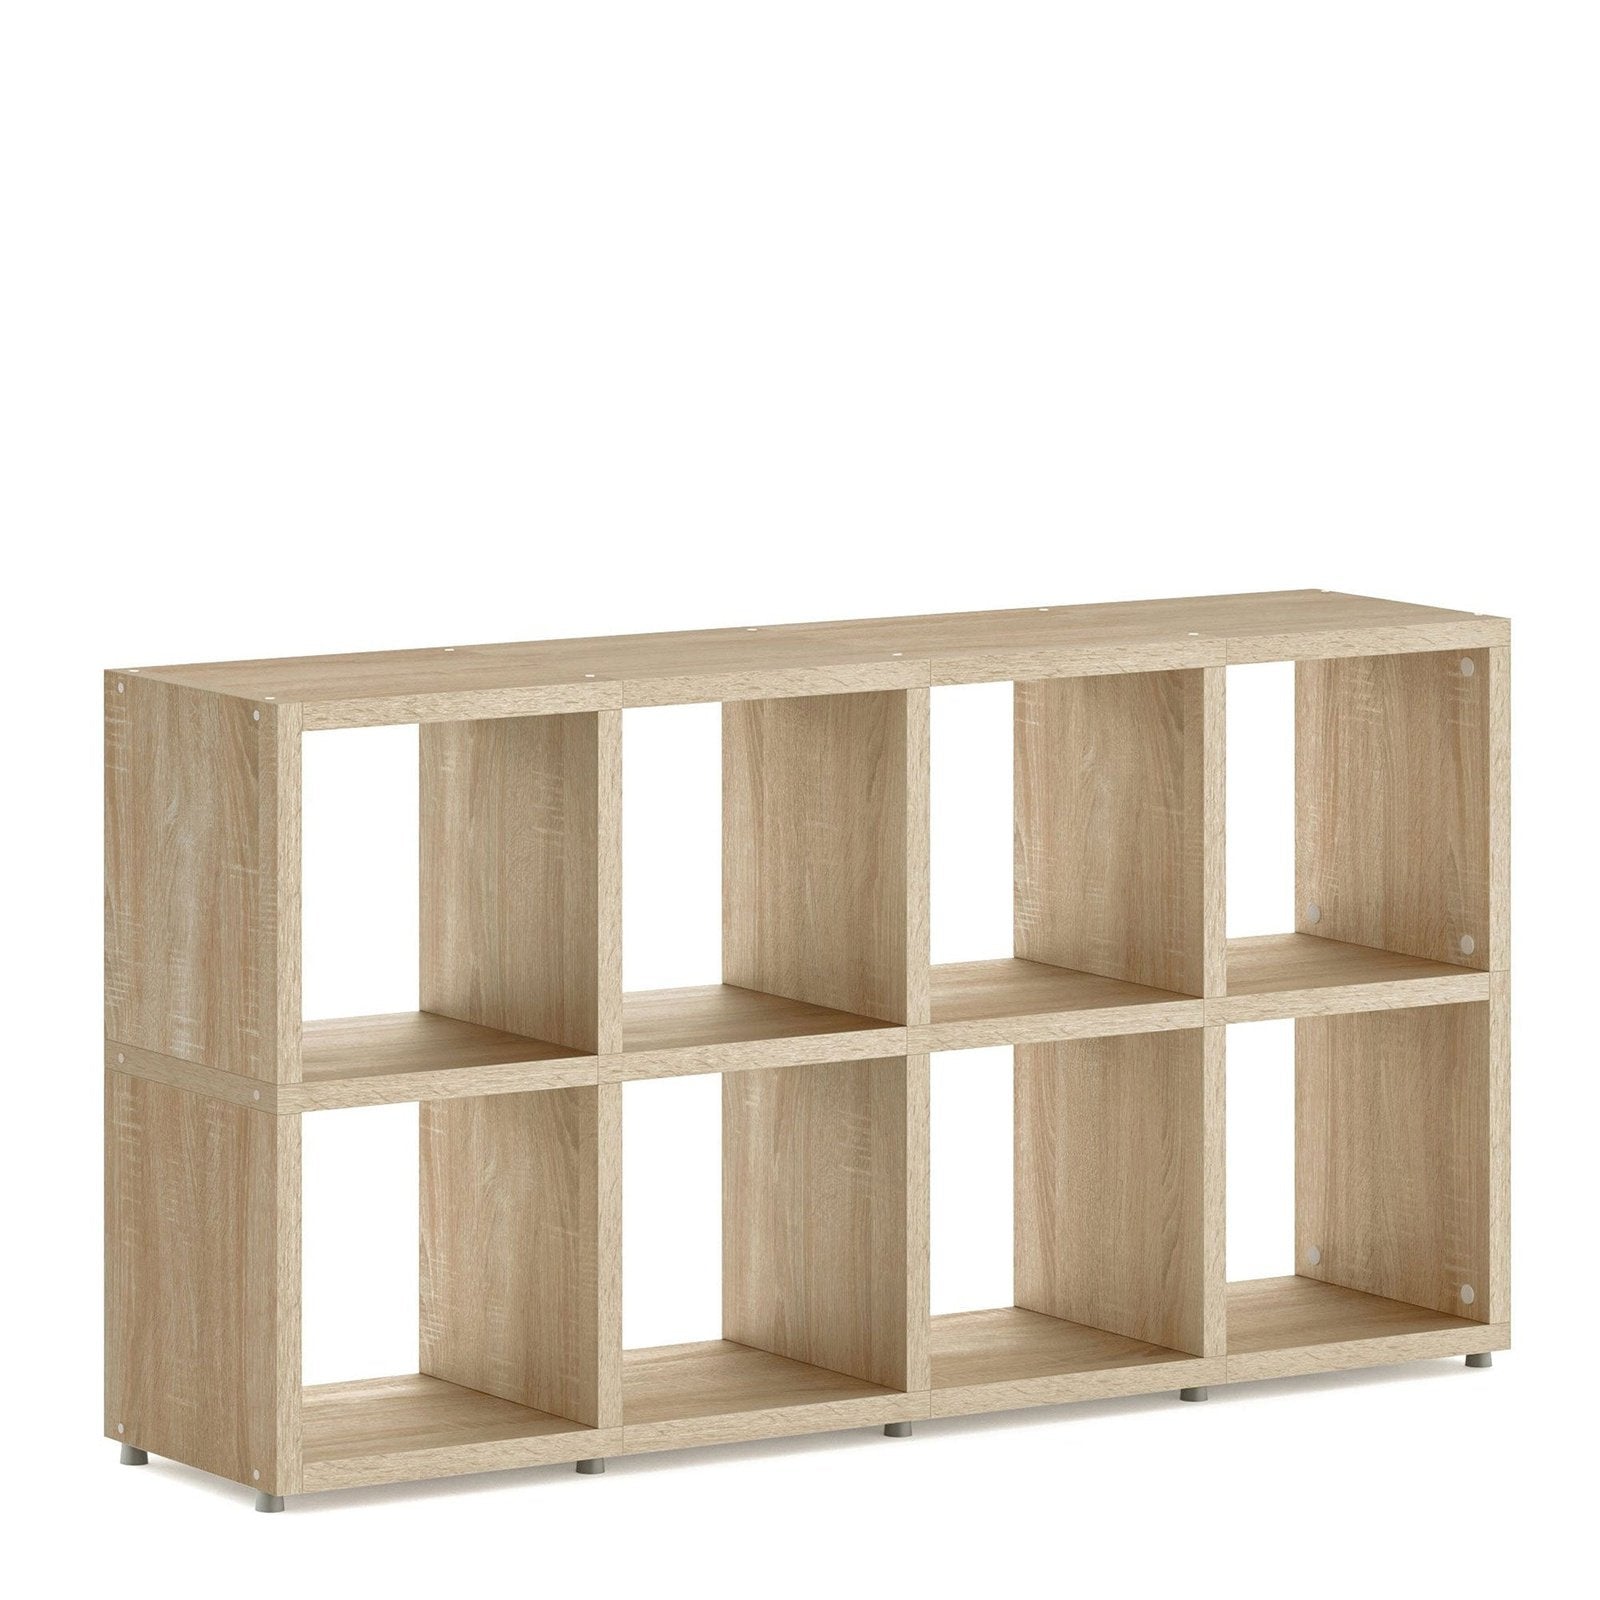 Boon 8x Cube Shelf Storage System - 760x1450x330mm - Office Products Online